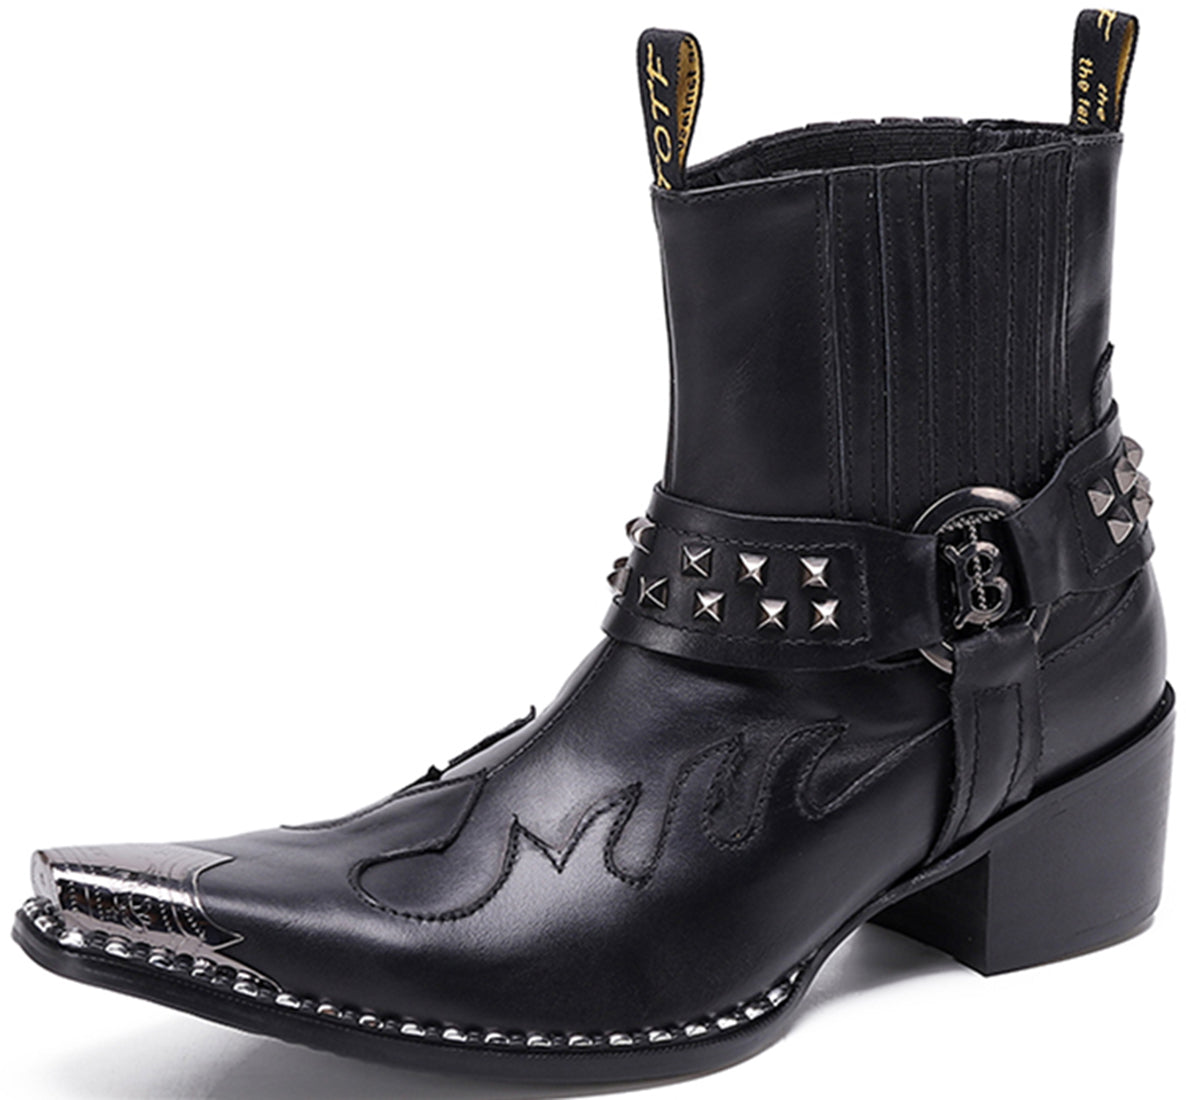 Men's Fashion High Top Western Boots